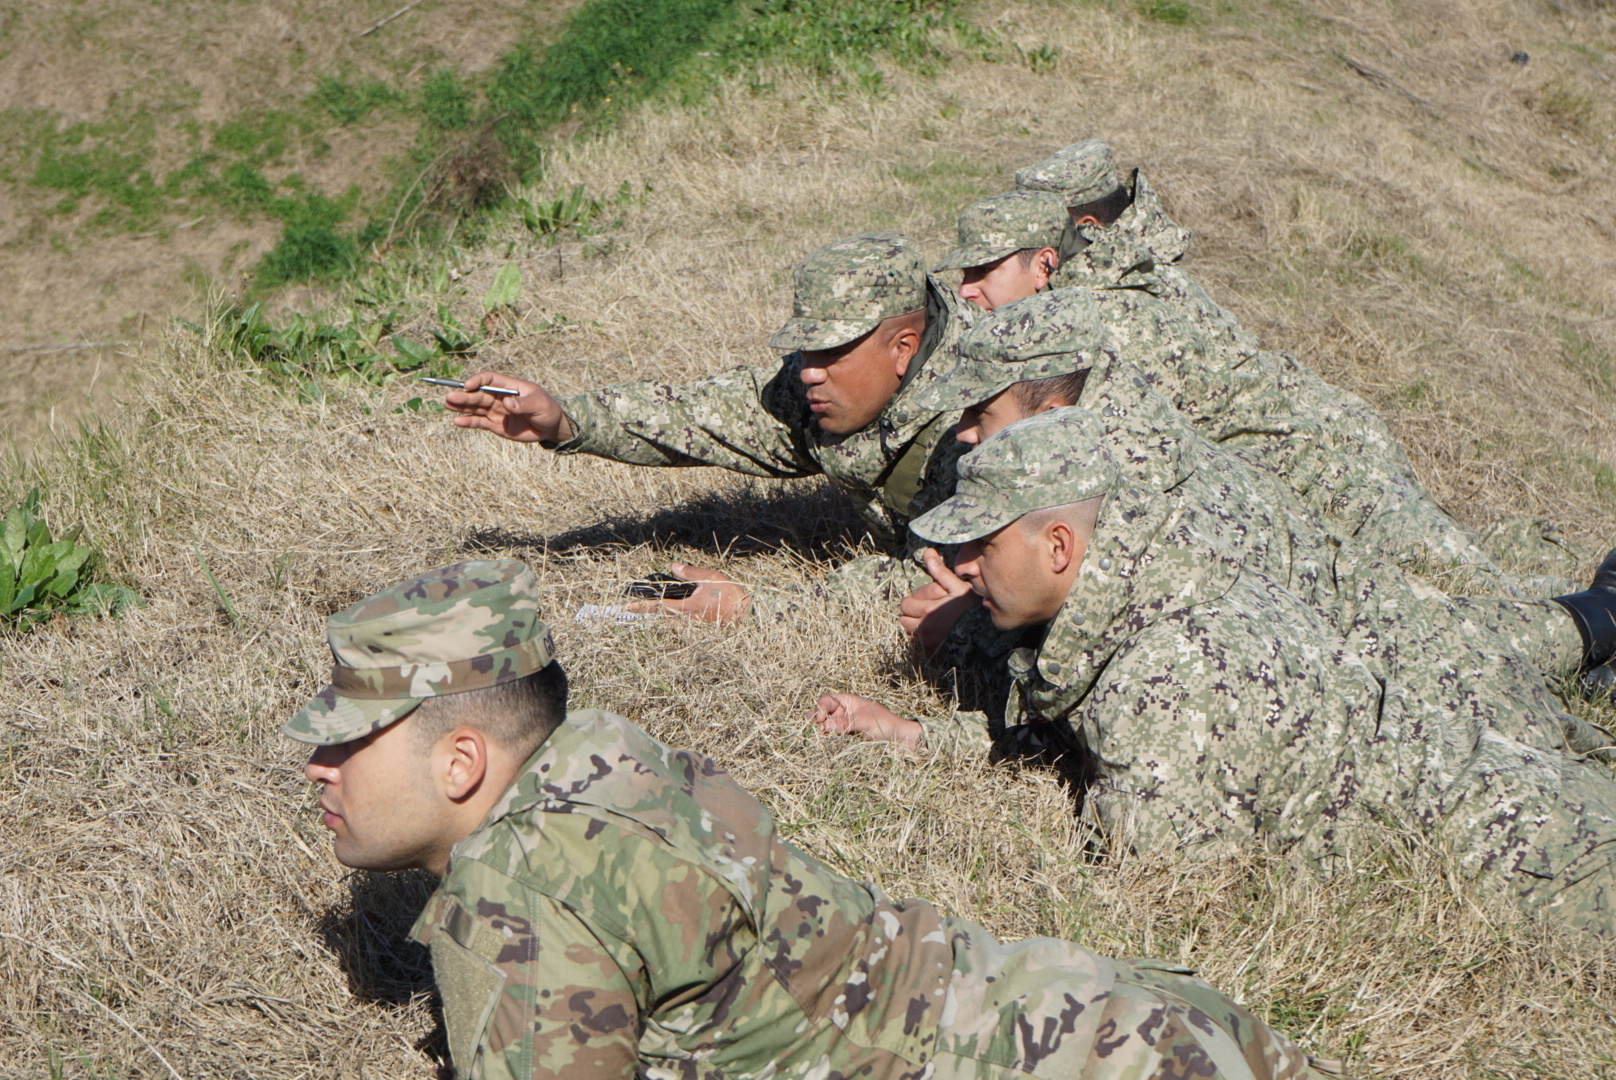 For or against in-company training? - IED - Project Updates